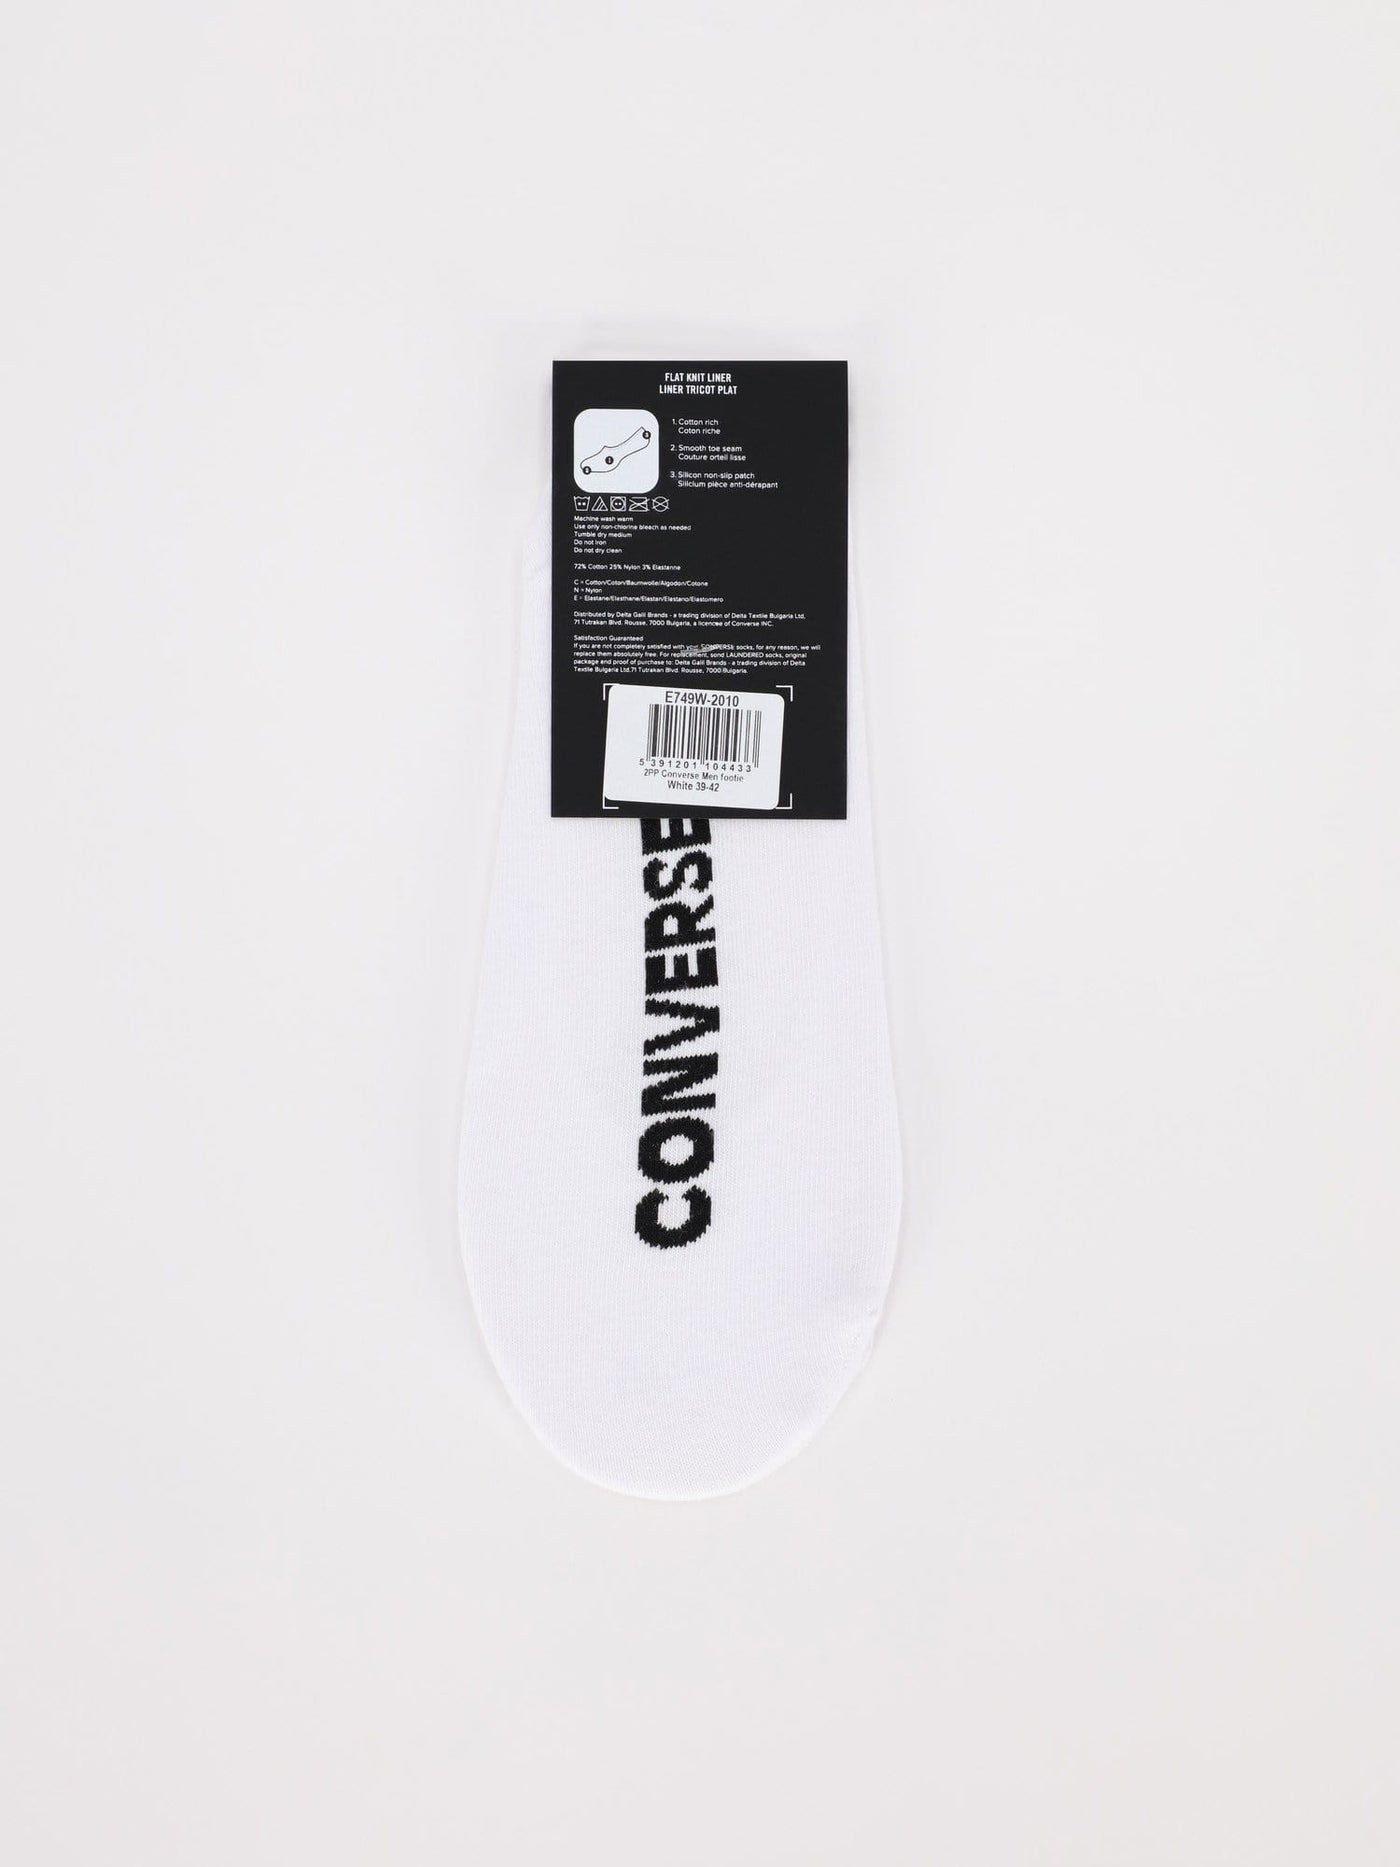 Converse Other Accessories 100 / One Size 3 Pairs of Flat Knit Liner Socks - White